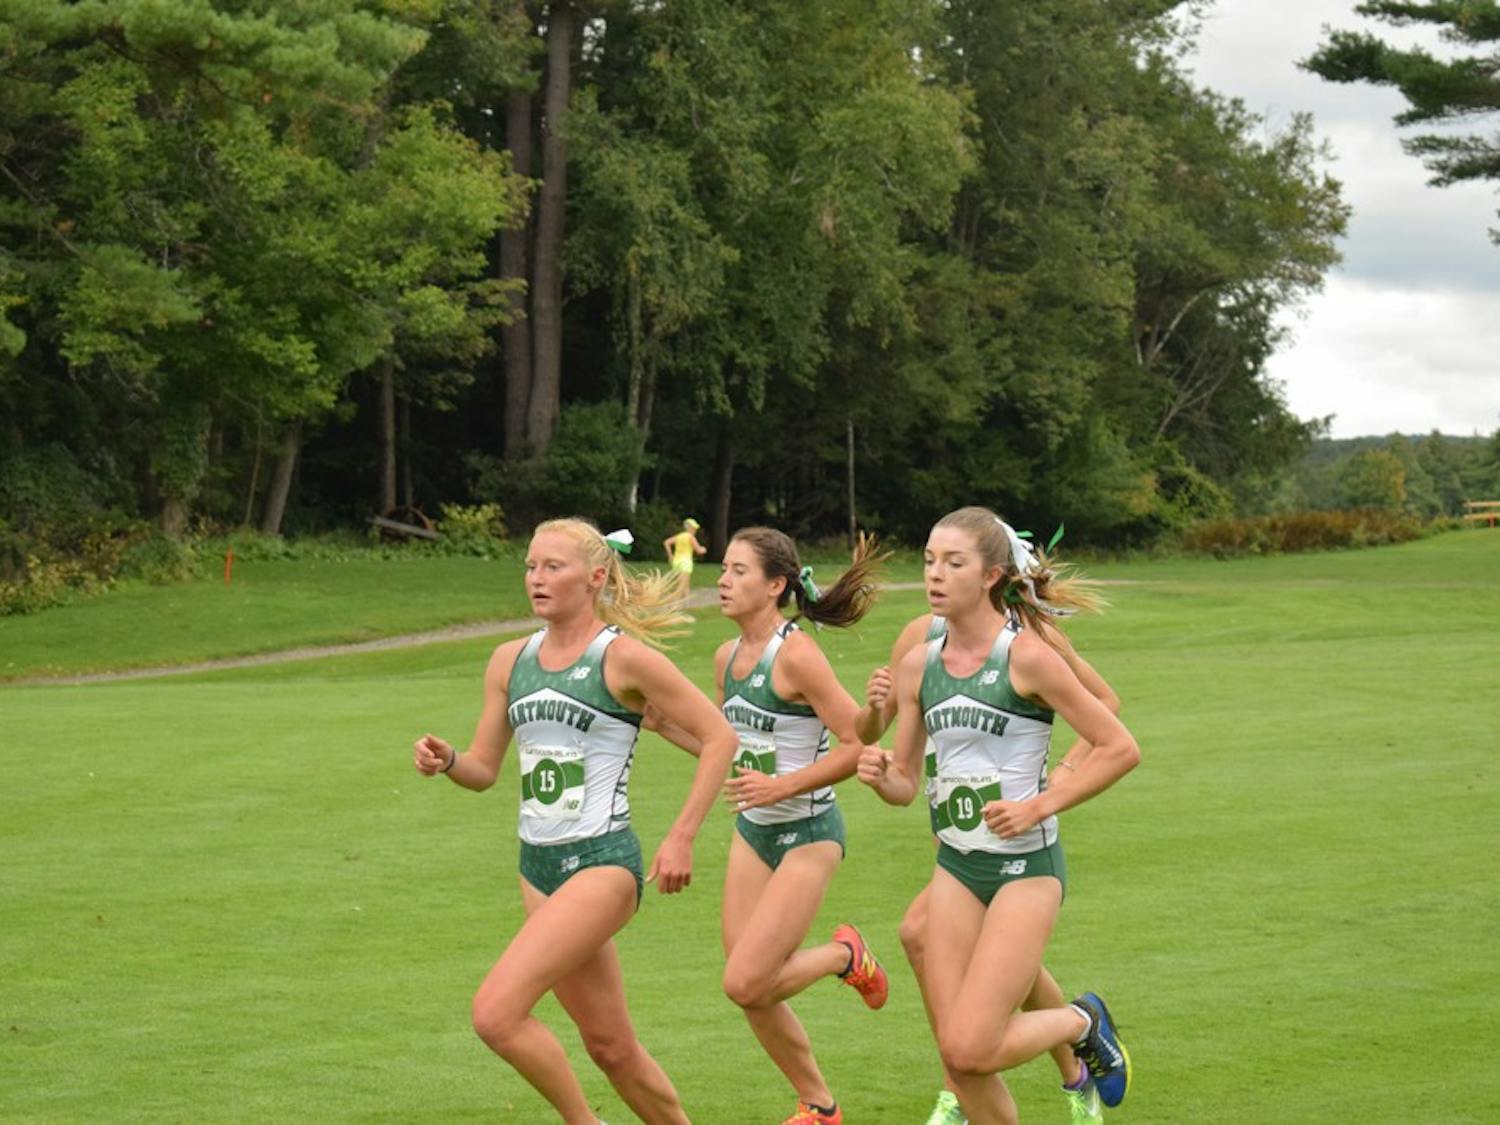 Olivia Lantz ’19 (left) led the field to win the Maribel Sanchez Souther Invitational., completing the 6-kilometer course in 21:33.15.